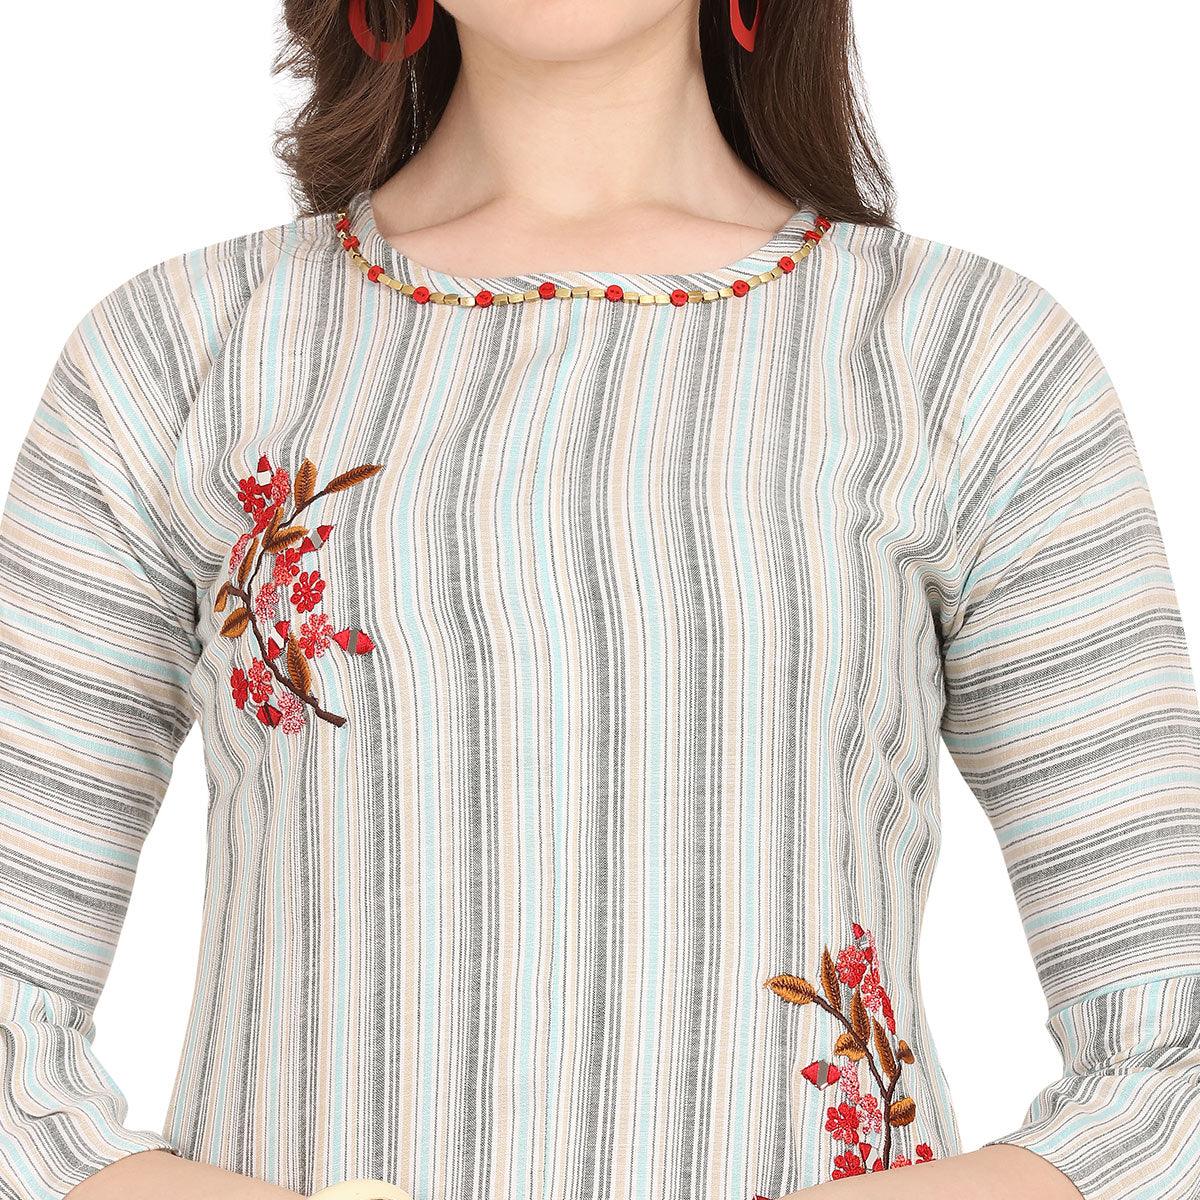 Arresting Off White-Blue Colored Party Wear Embroidered Work Rayon Kurti - Peachmode